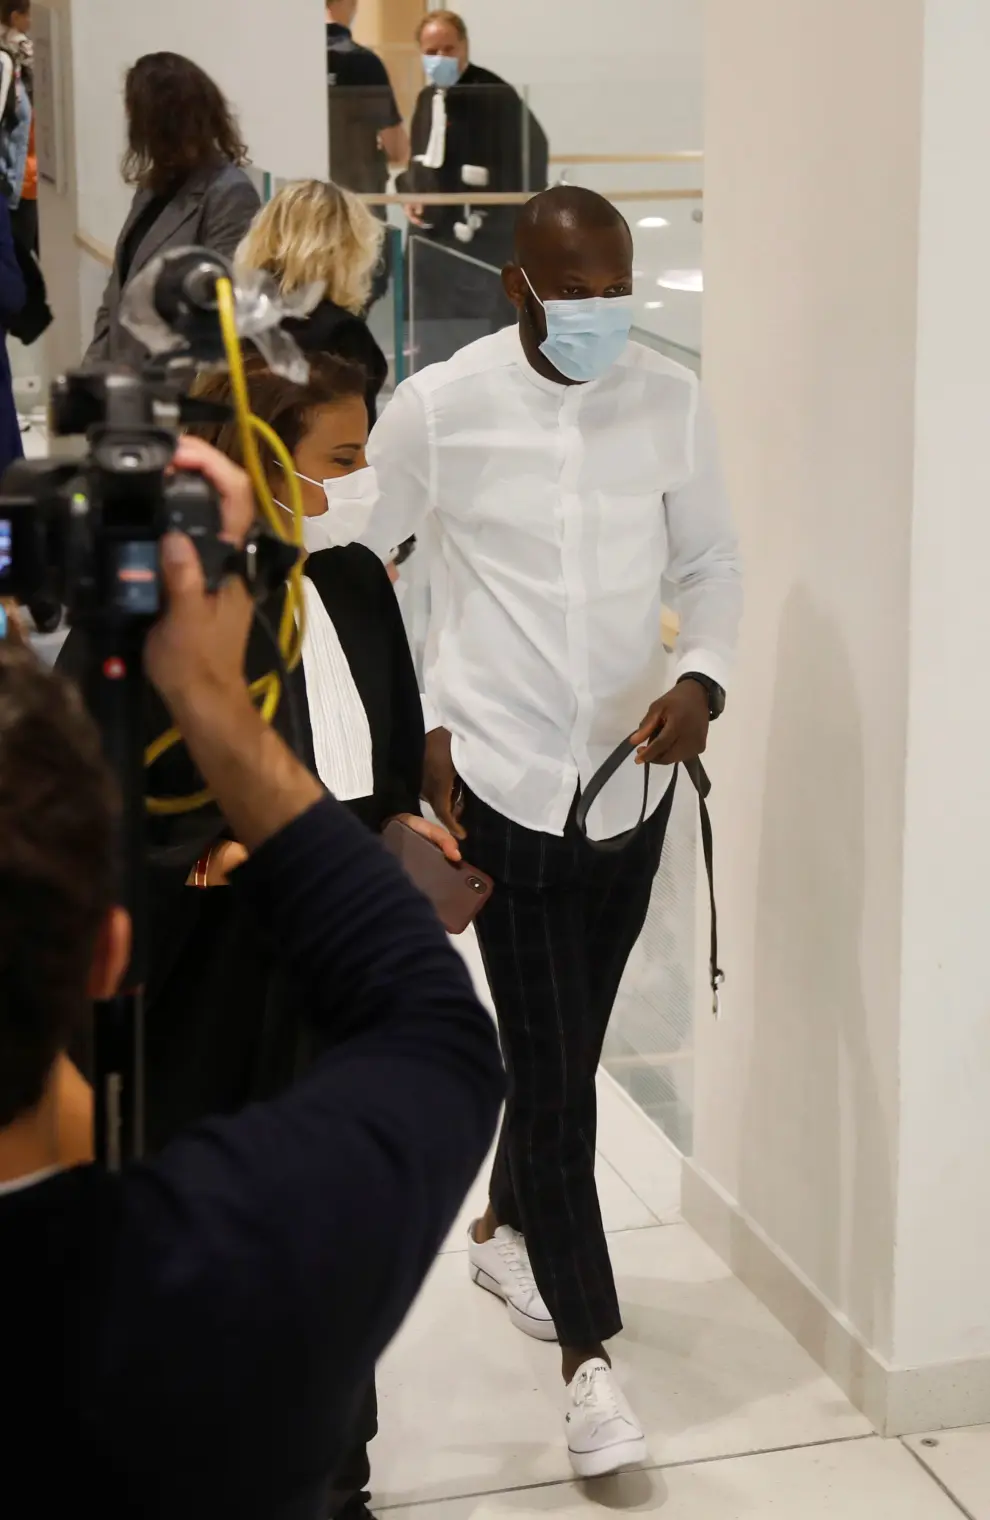 Lassana Bathily, who saved hostages during the attack of the Hyper Cacher kosher supermarket, wearing a protective face mask, arrives for the opening of the trial of the January 2015 Paris attacks against Charlie Hebdo satirical weekly, a policewoman in Montrouge and the Hyper Cacher kosher supermarket, at Paris courthouse, France, Steptember 2, 2020. The trial will take place from September 2 to November 10. REUTERS/Charles Platiau [[[REUTERS VOCENTO]]] FRANCE-CHARLIEHEBDO/TRIAL